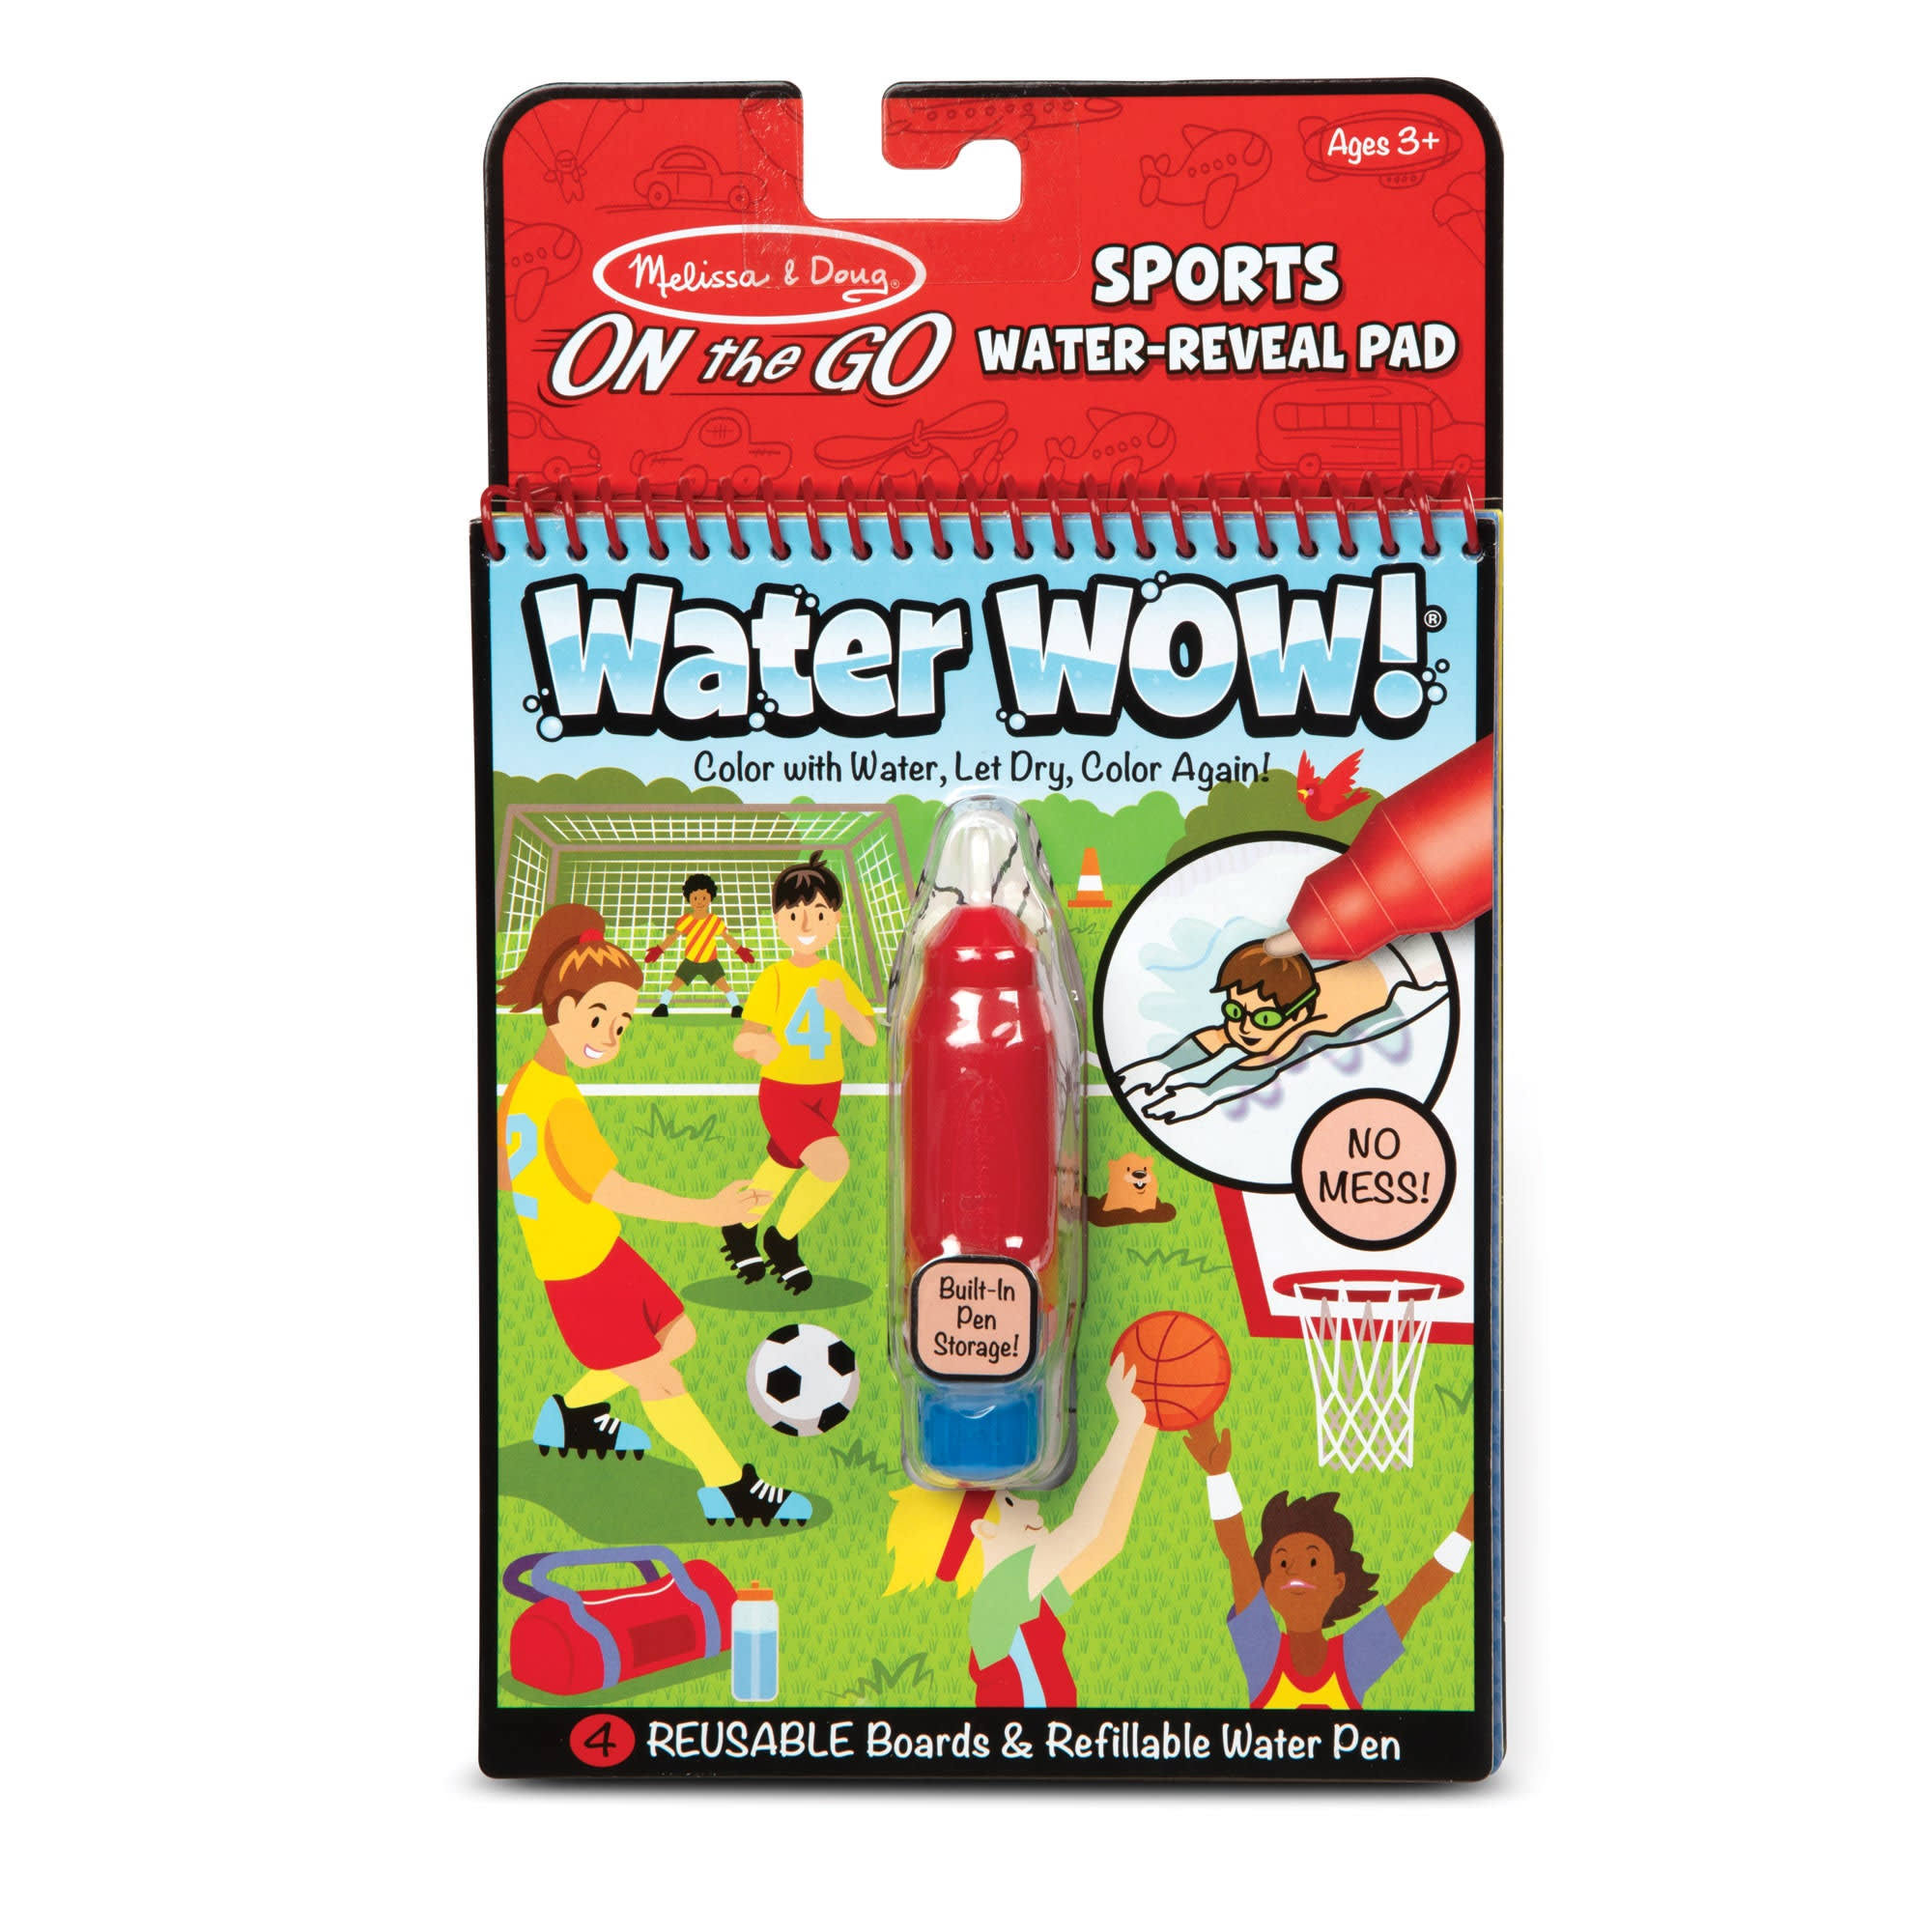 Melissa & Doug Water Wow! Sports Water Reveal Pad